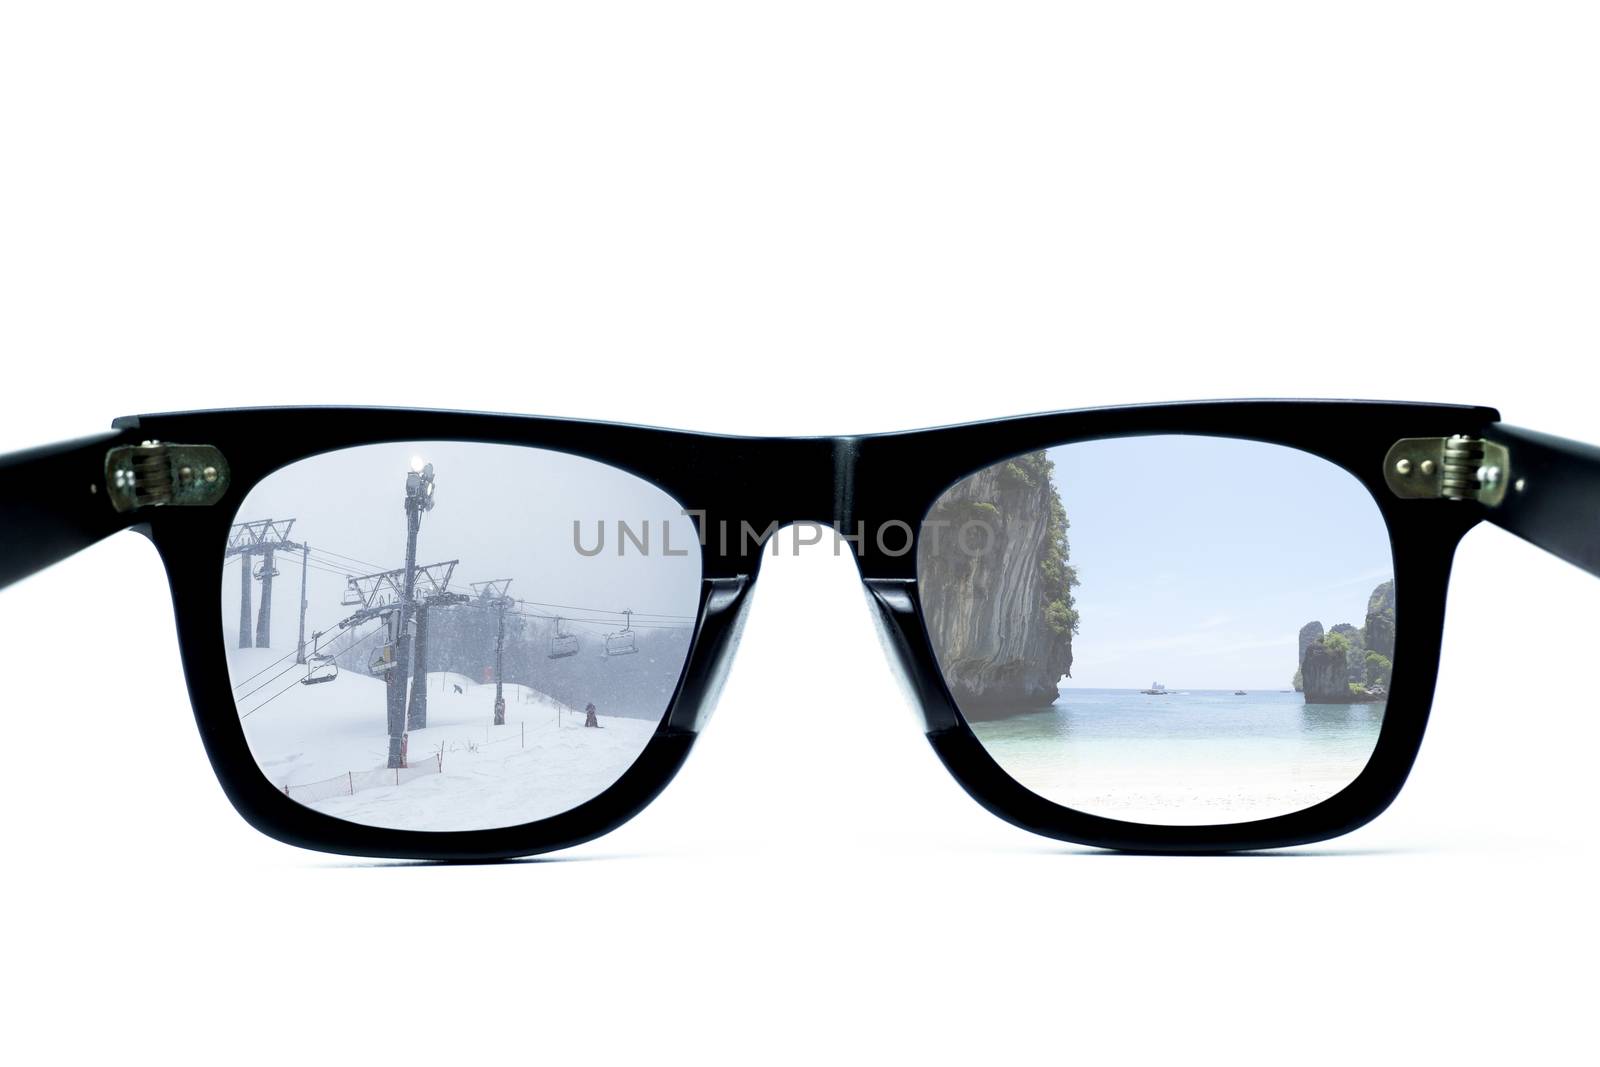 Glasses isolated on a white background, Alternative concepts Traveling to the sea or snow, weather cold or weather hot by Muangngam